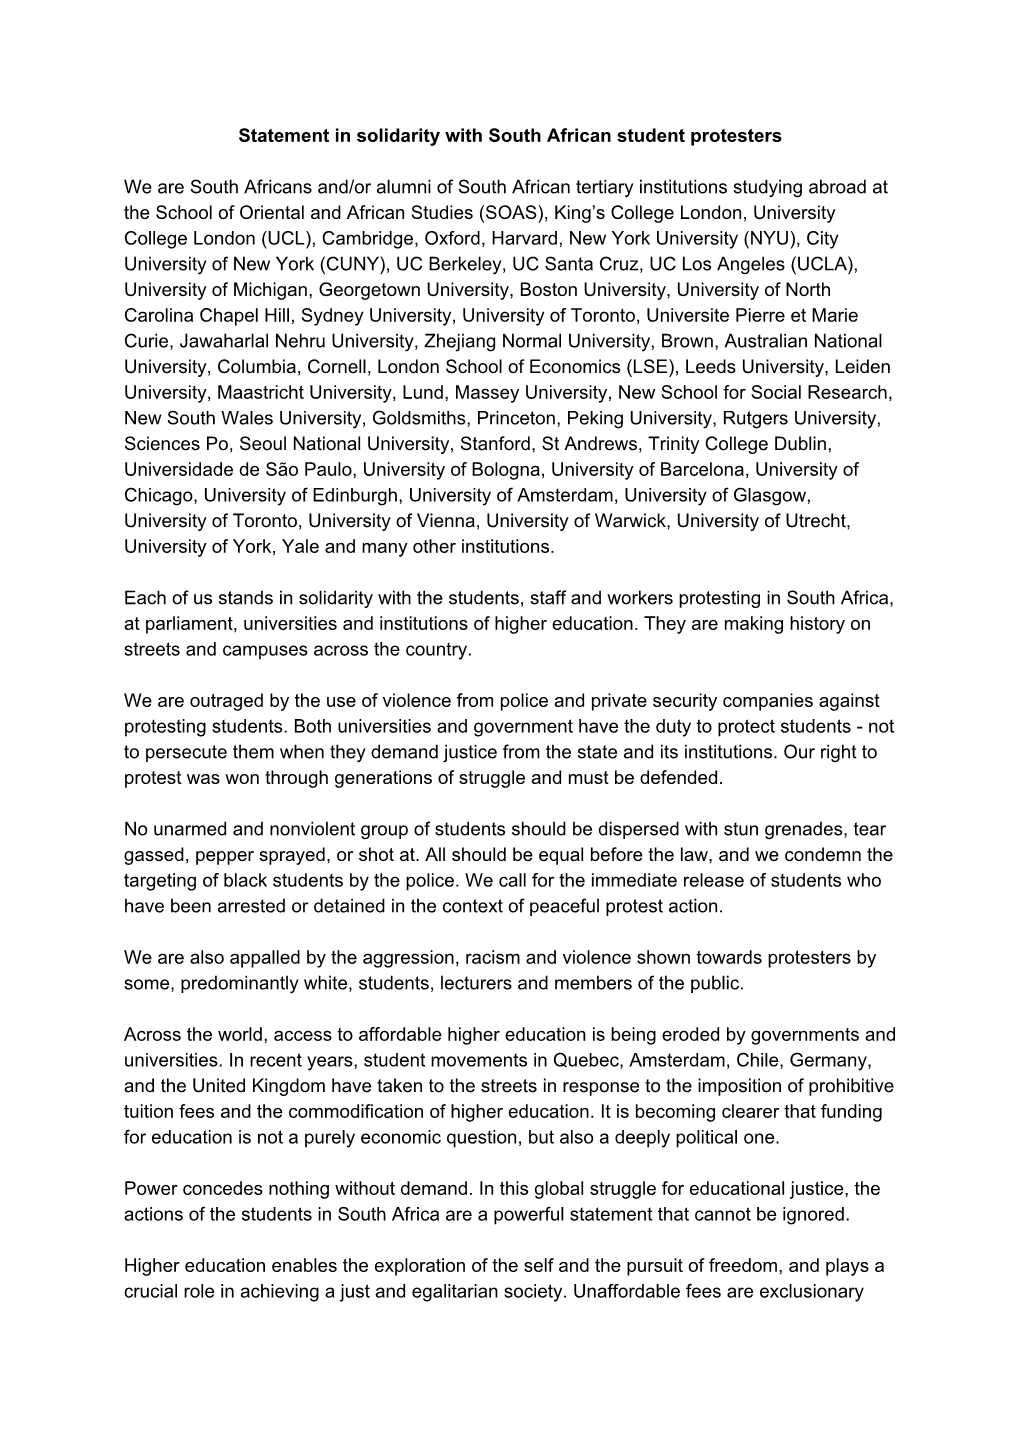 Statement in Solidarity with South African Student Protesters